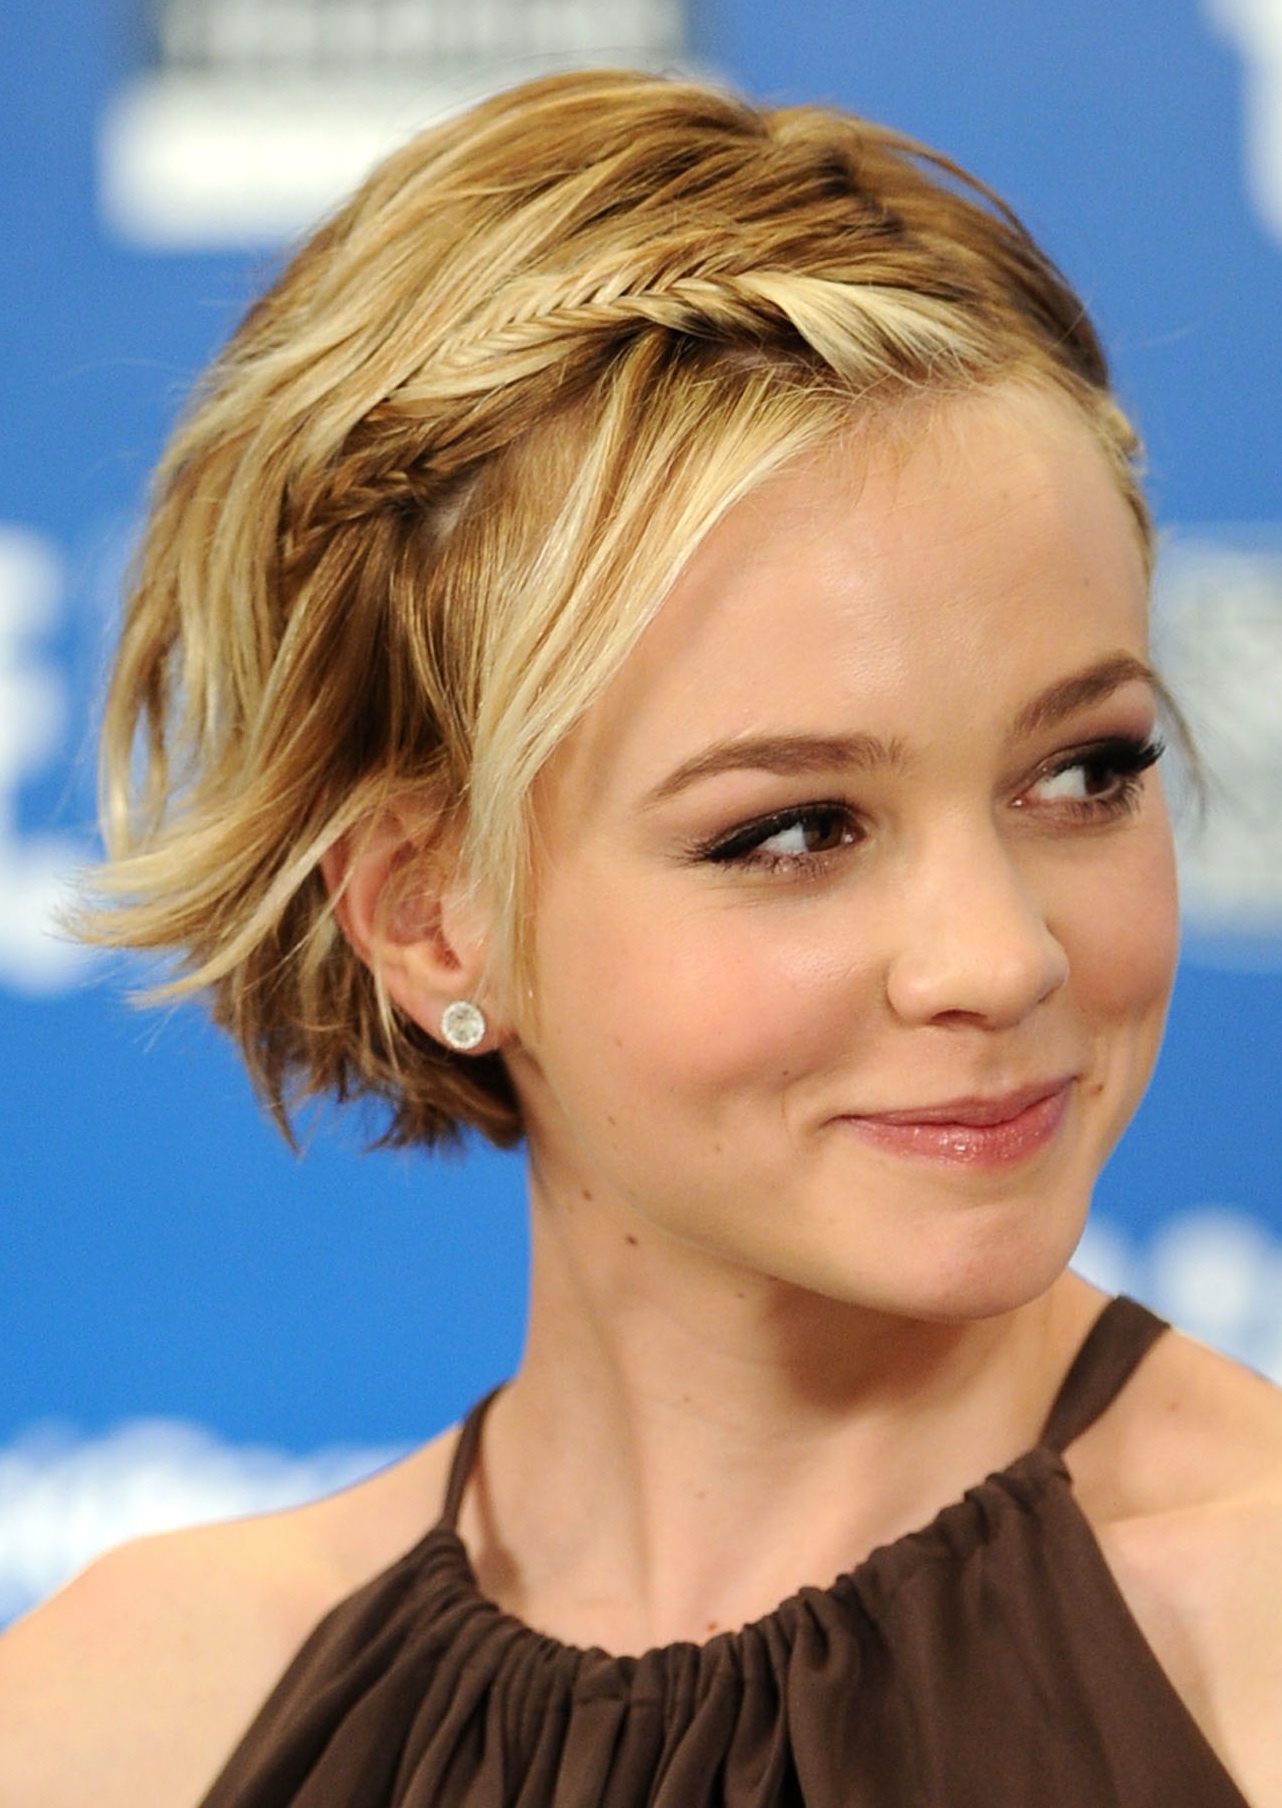 TORONTO, ON - SEPTEMBER 13:  Actress Carey Mulligan speaks at "Never Let Me Go" press conference during the 2010 Toronto International Film Festival at the Hyatt Regency on September 13, 2010 in Toronto, Canada.  (Photo by Alberto E. Rodriguez/Getty Images)